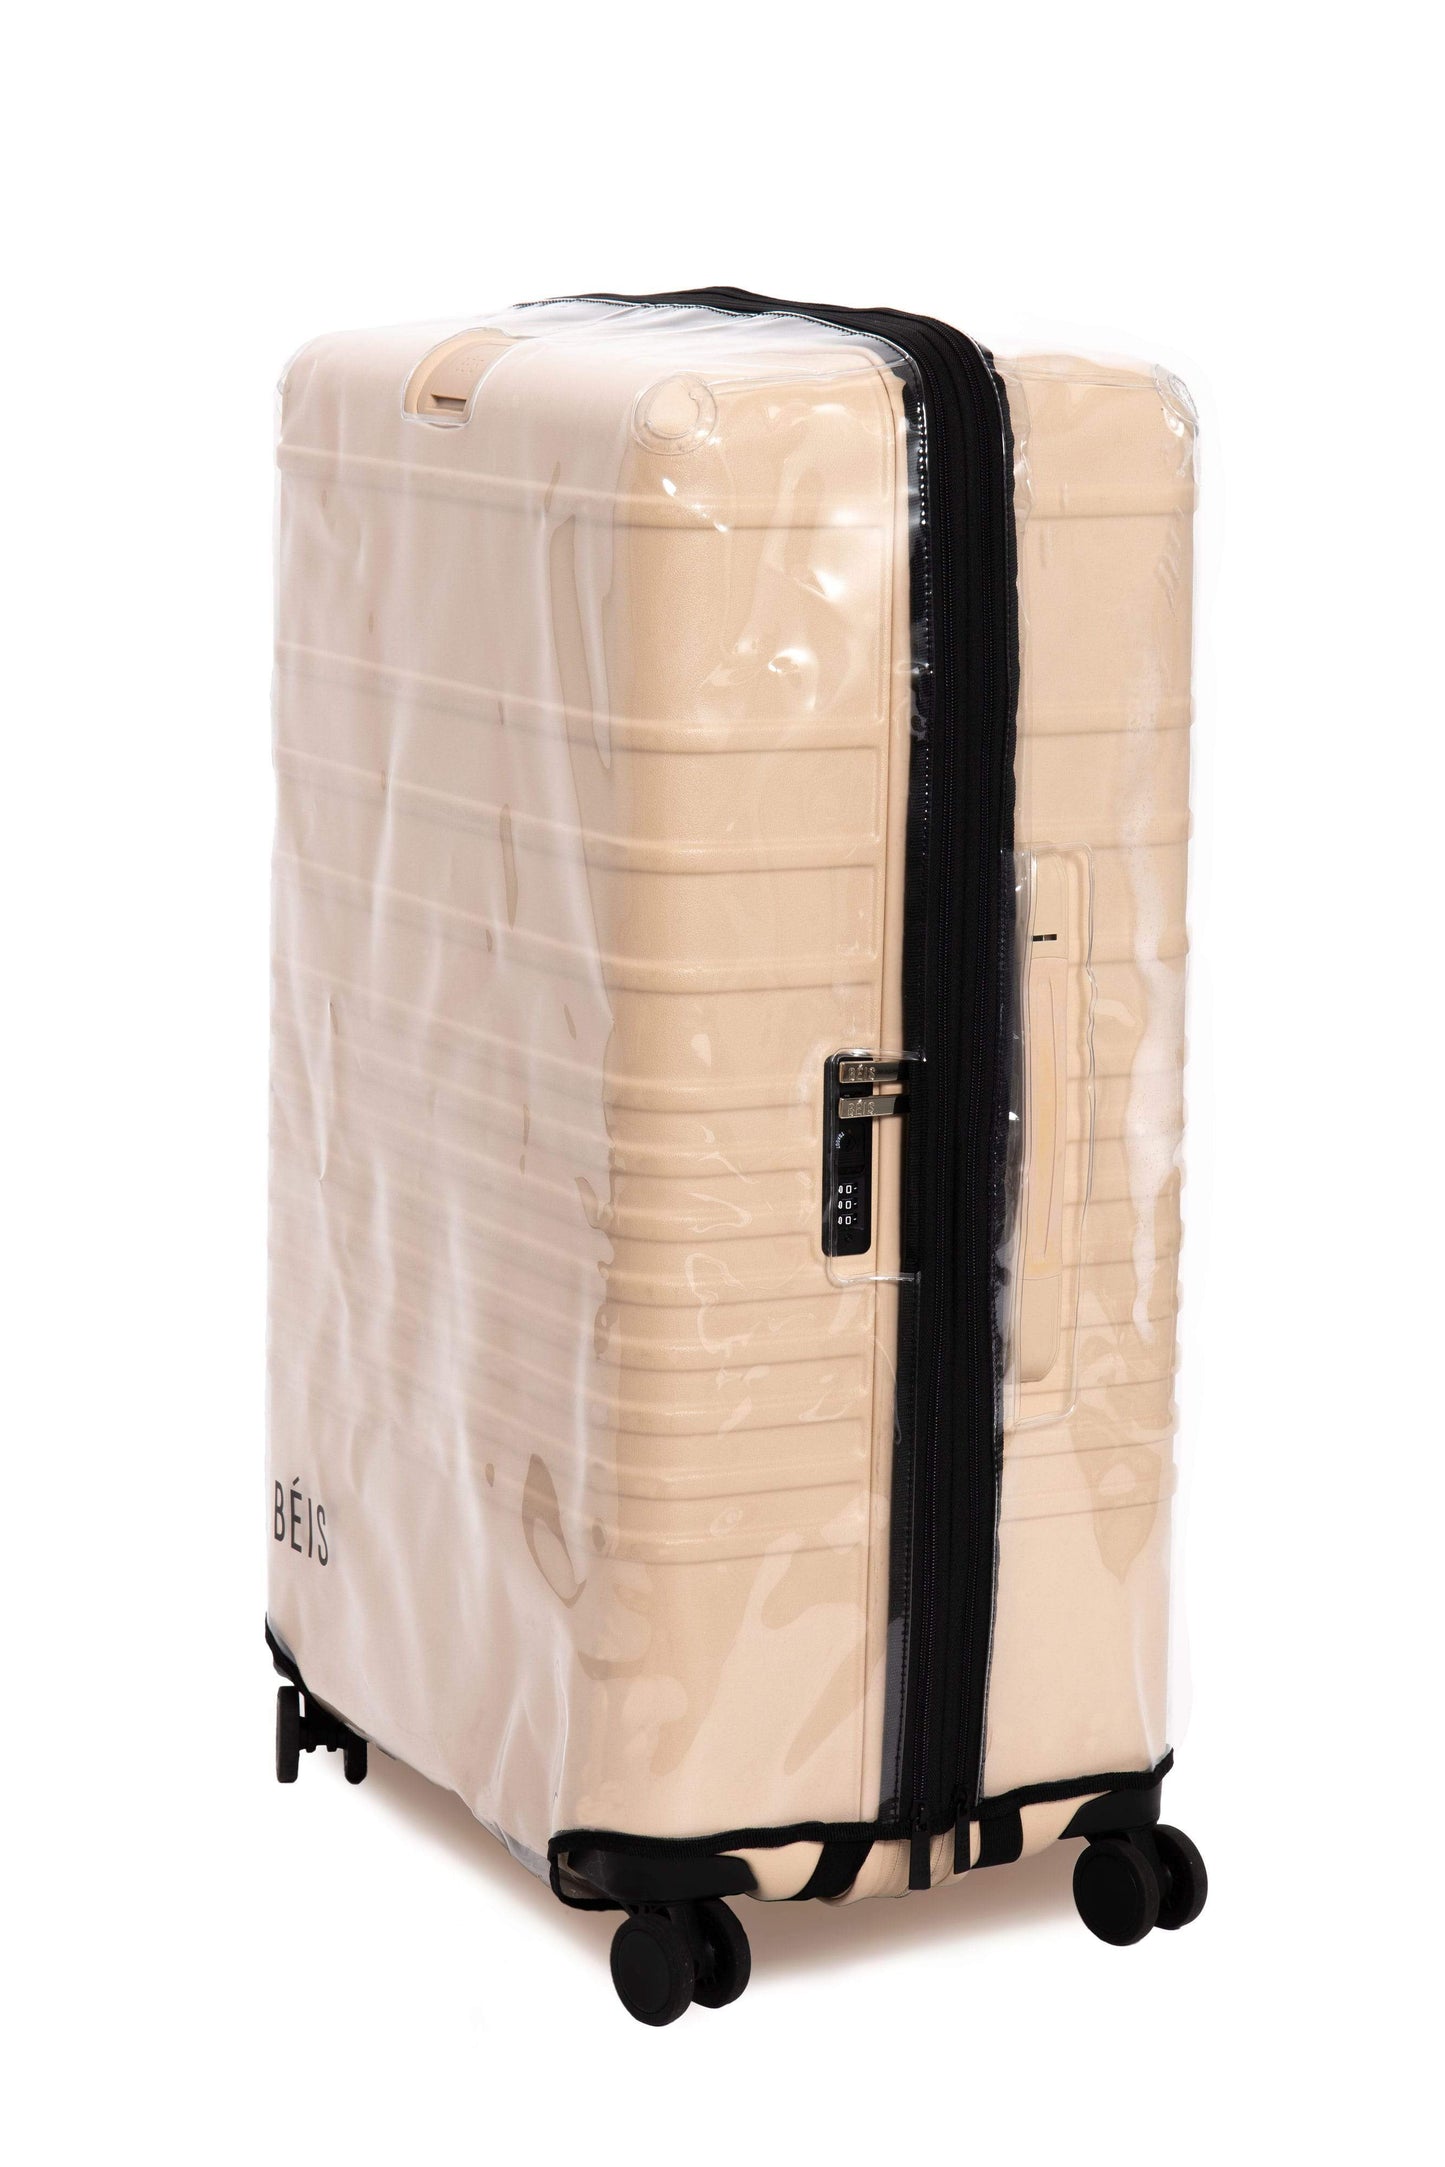 The Large Check-In Luggage Cover